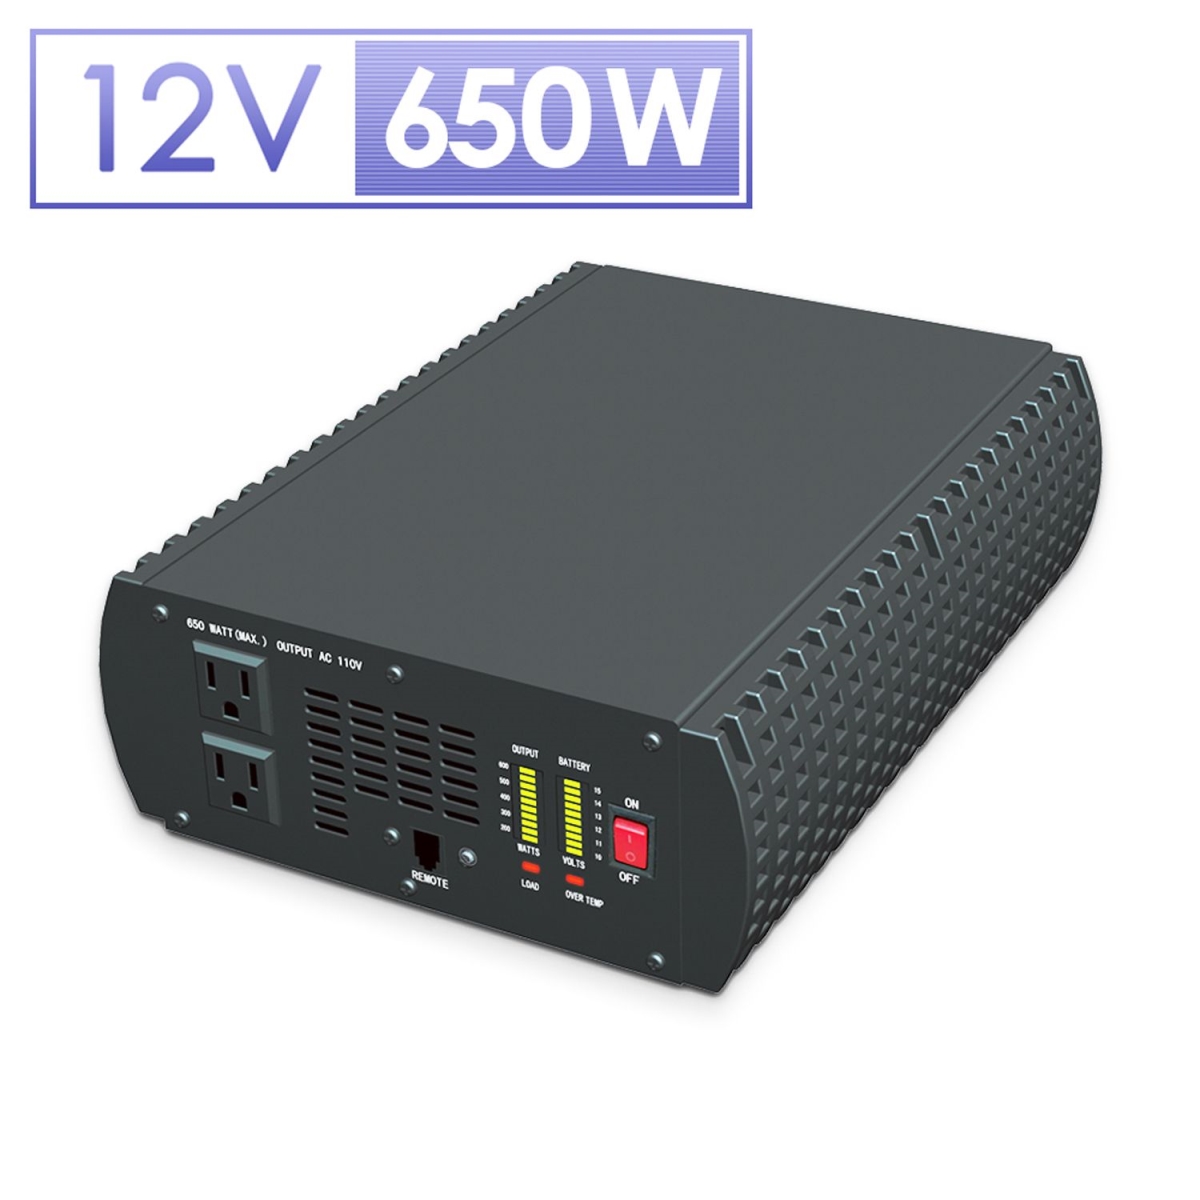 Picture of Automaxx UP8K1HCB 650W 12V Pure Sine Wave Inverter with Bluetooth Remote Control